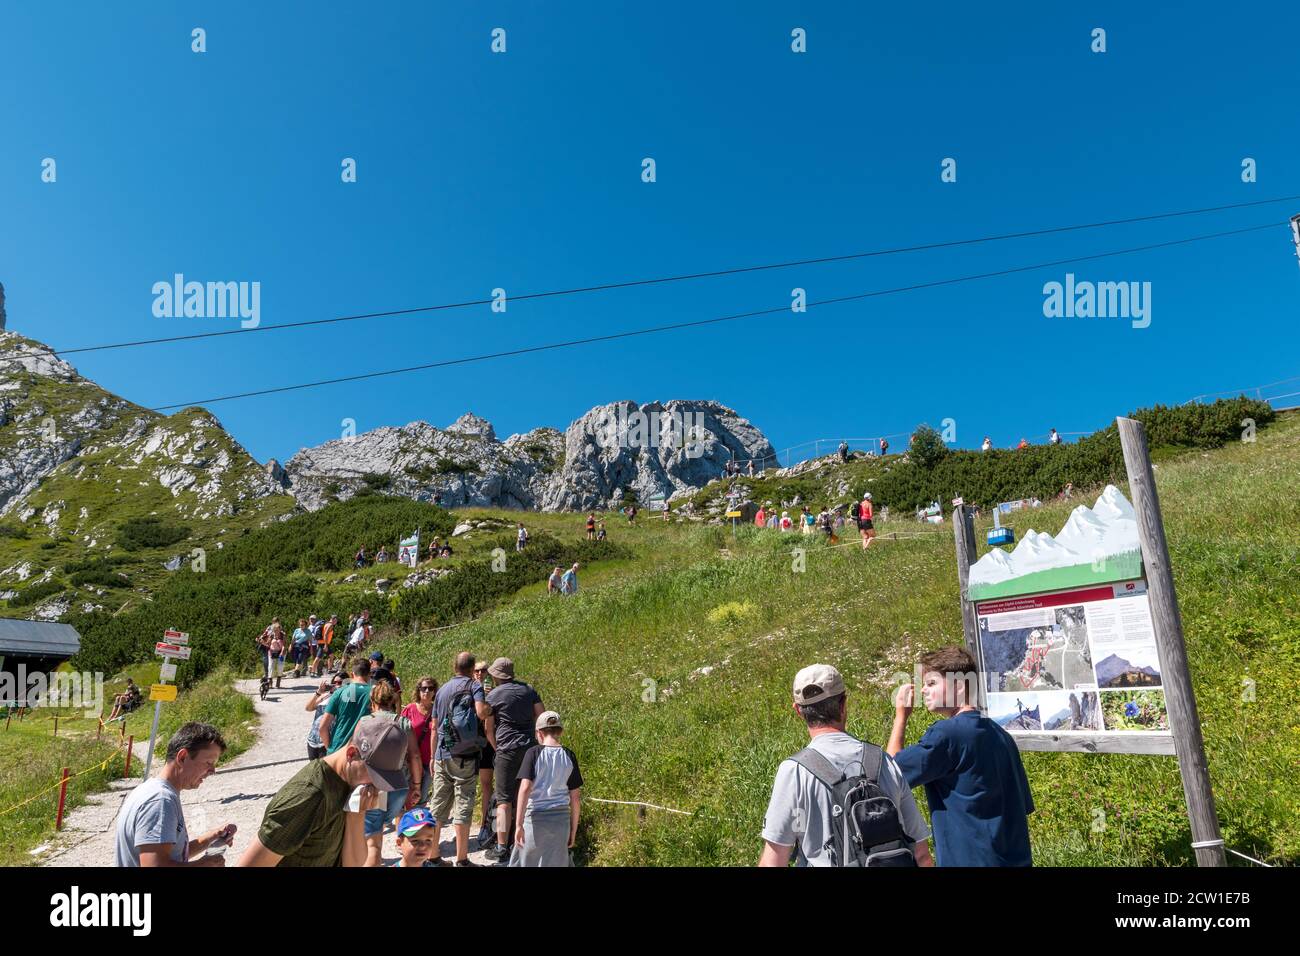 Tourists go hiking in the area arround mountain station from the Alpspitze cable car. Stock Photo